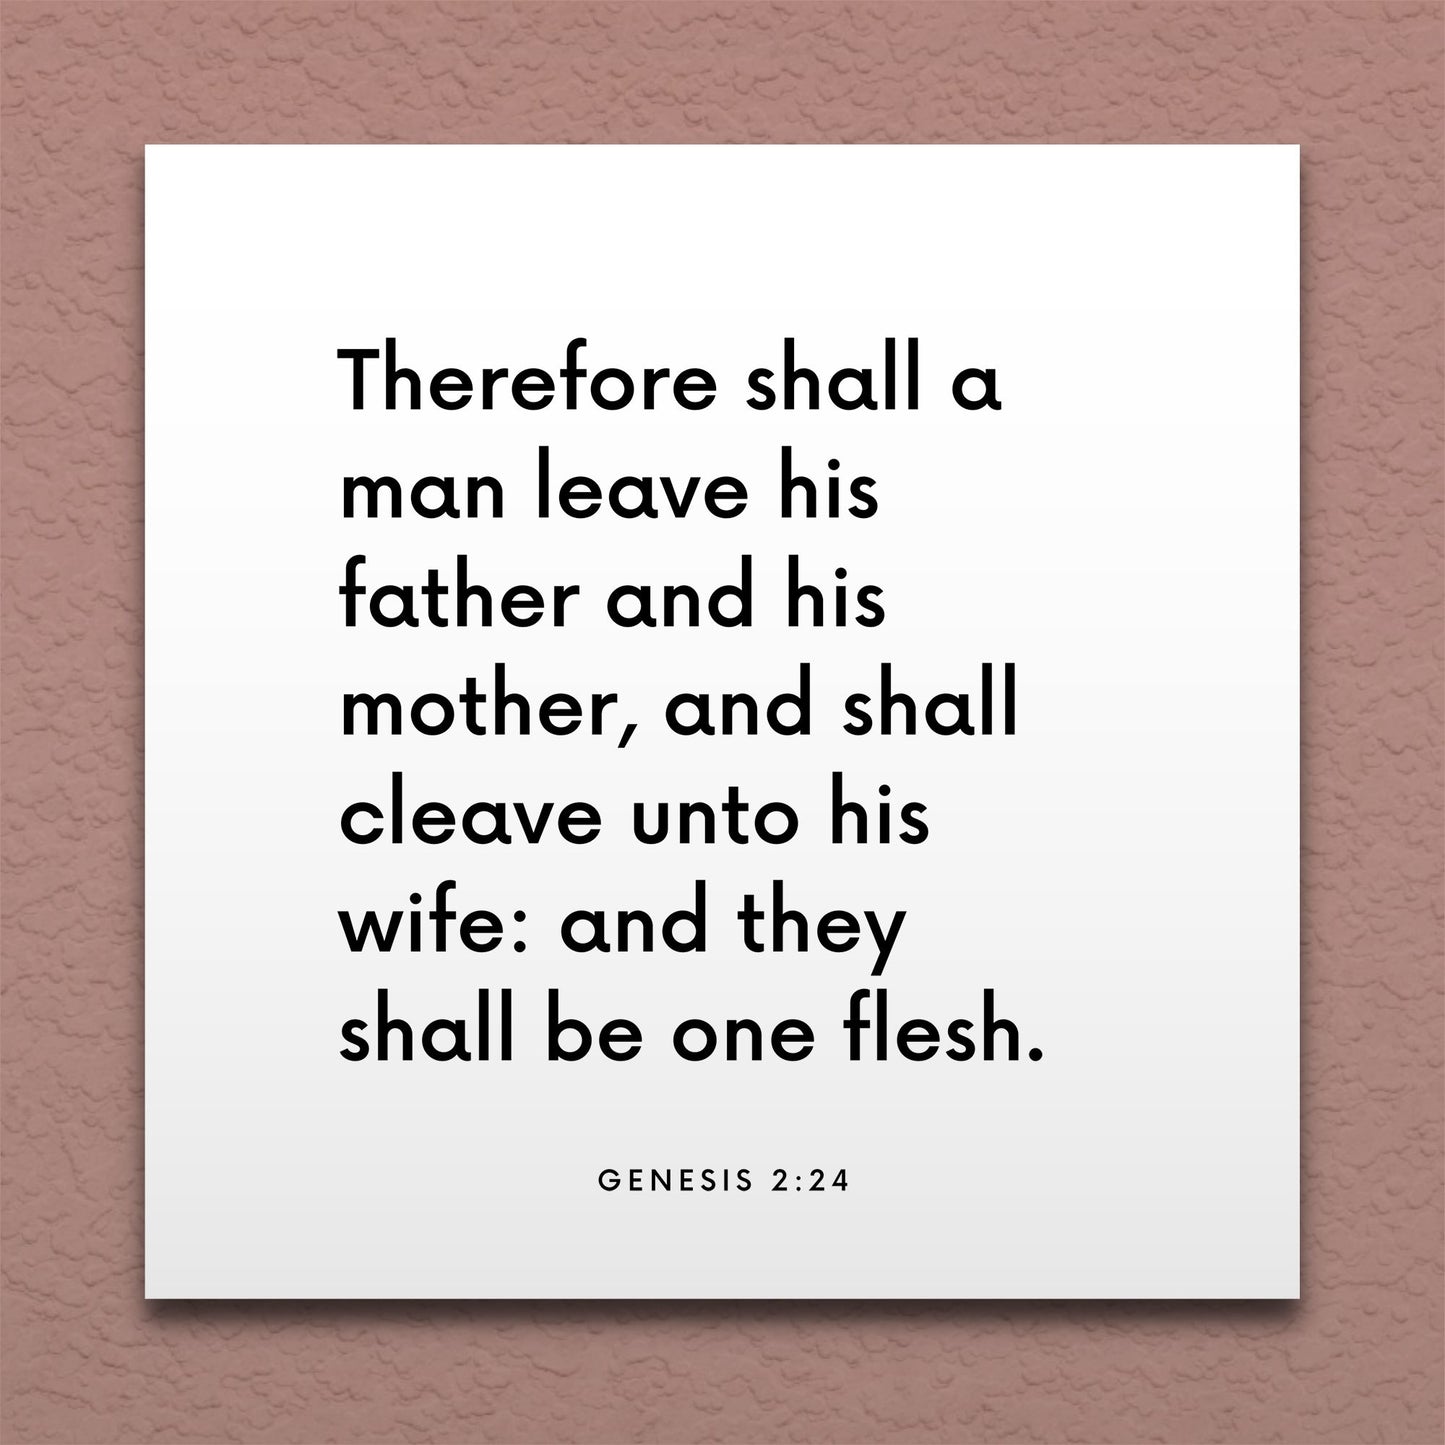 Wall-mounted scripture tile for Genesis 2:24 - "Therefore shall a man leave his father and his mother"